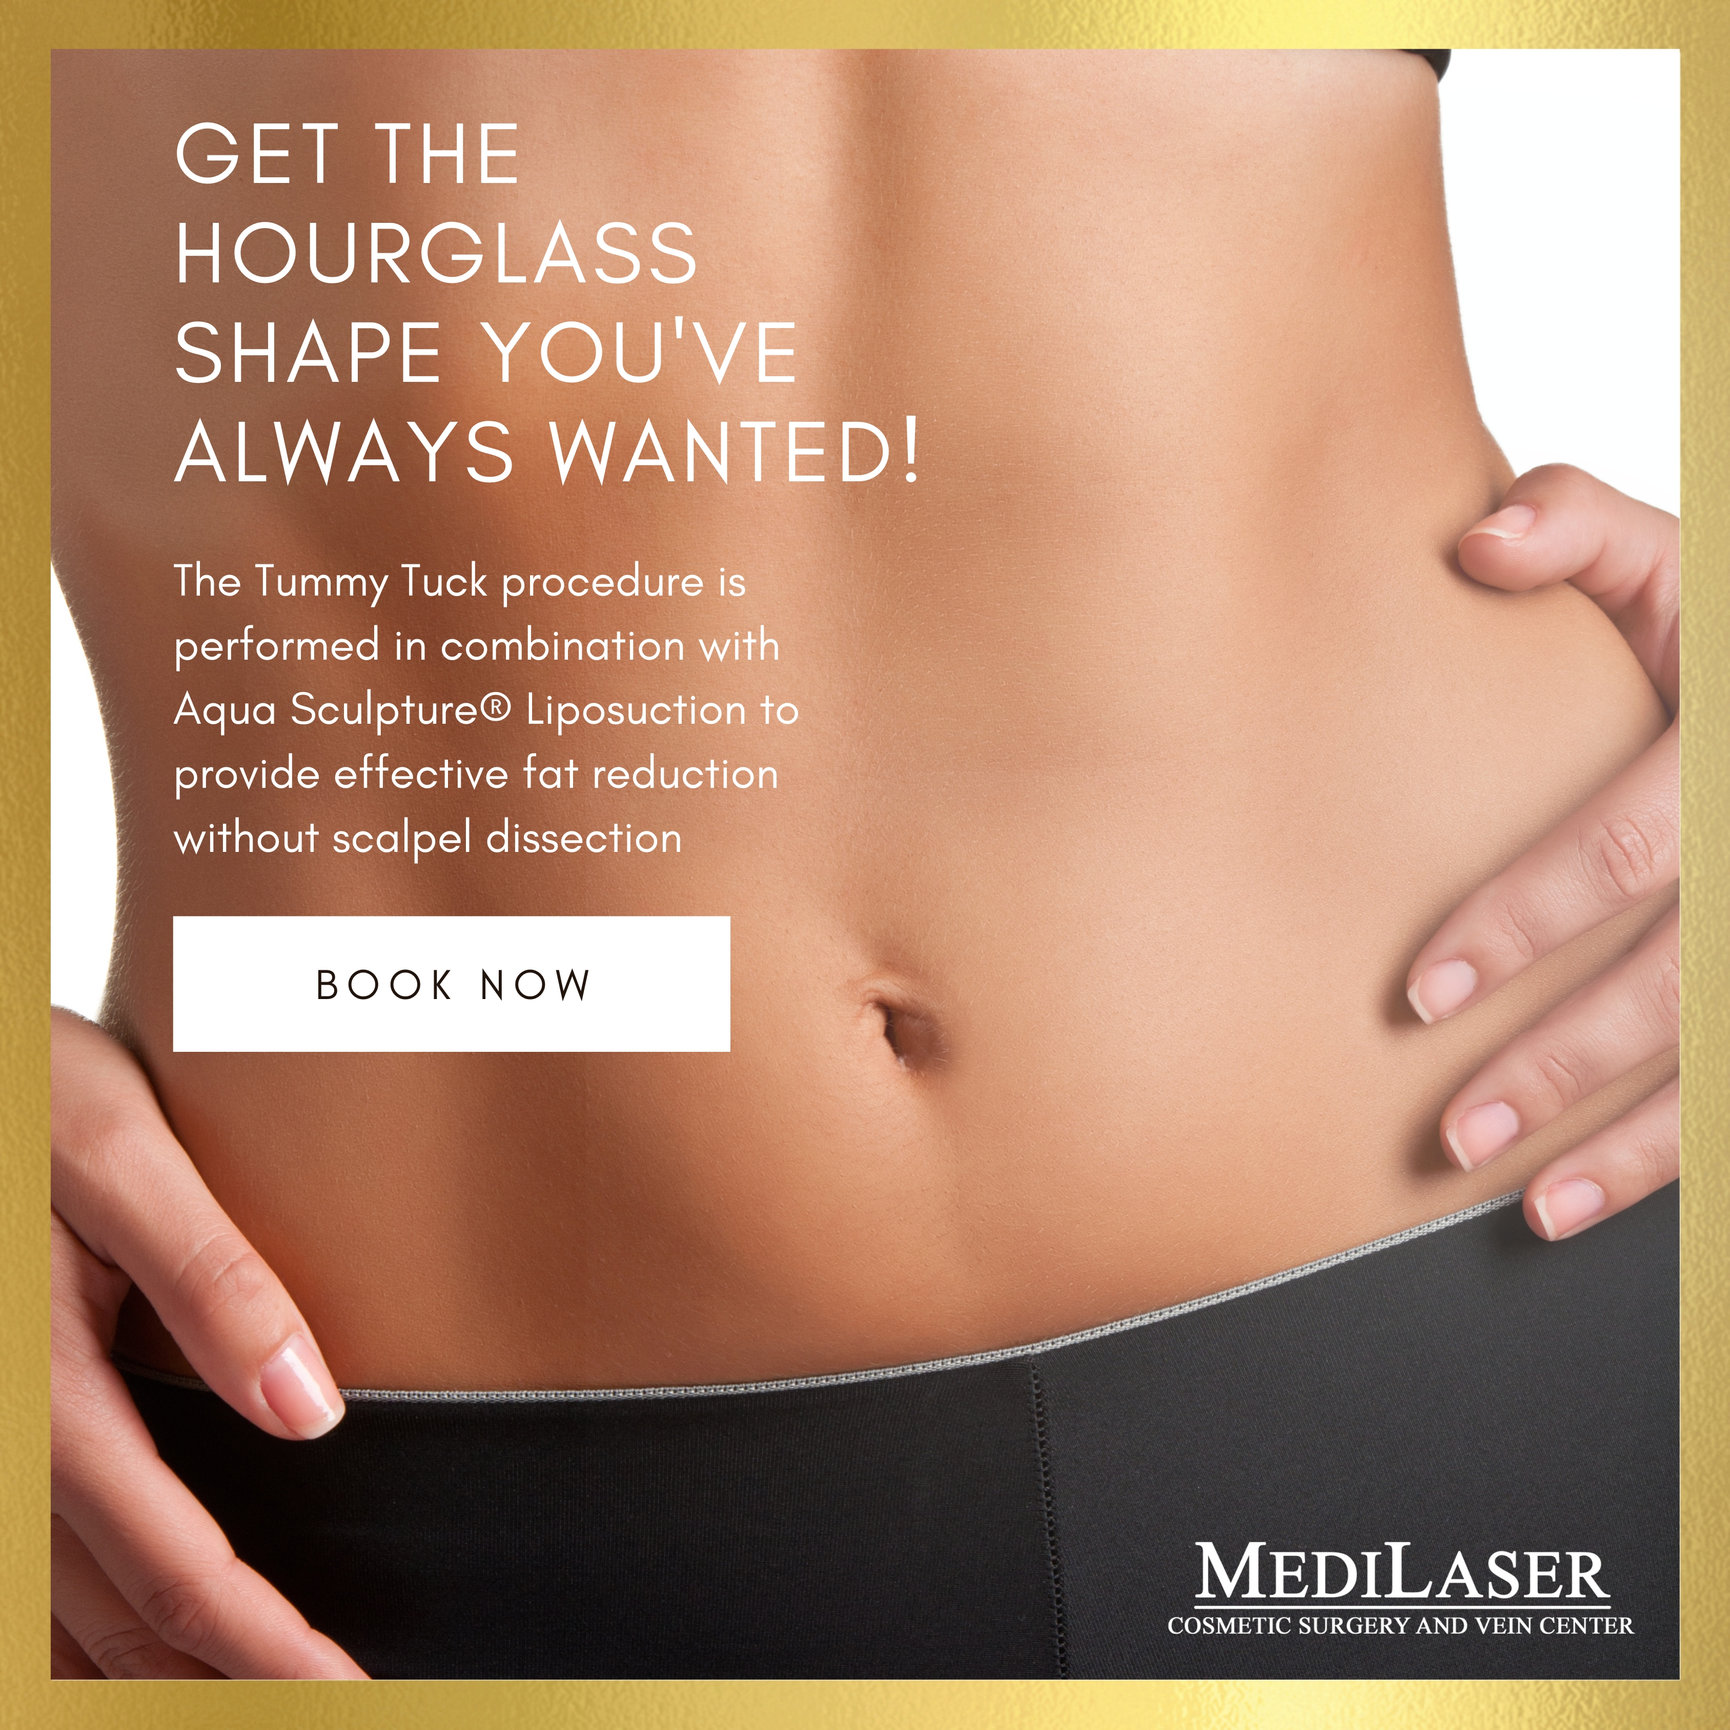 Get The Hourglass Shape You've Always Wanted - Medilaser Surgery and Vein  Center